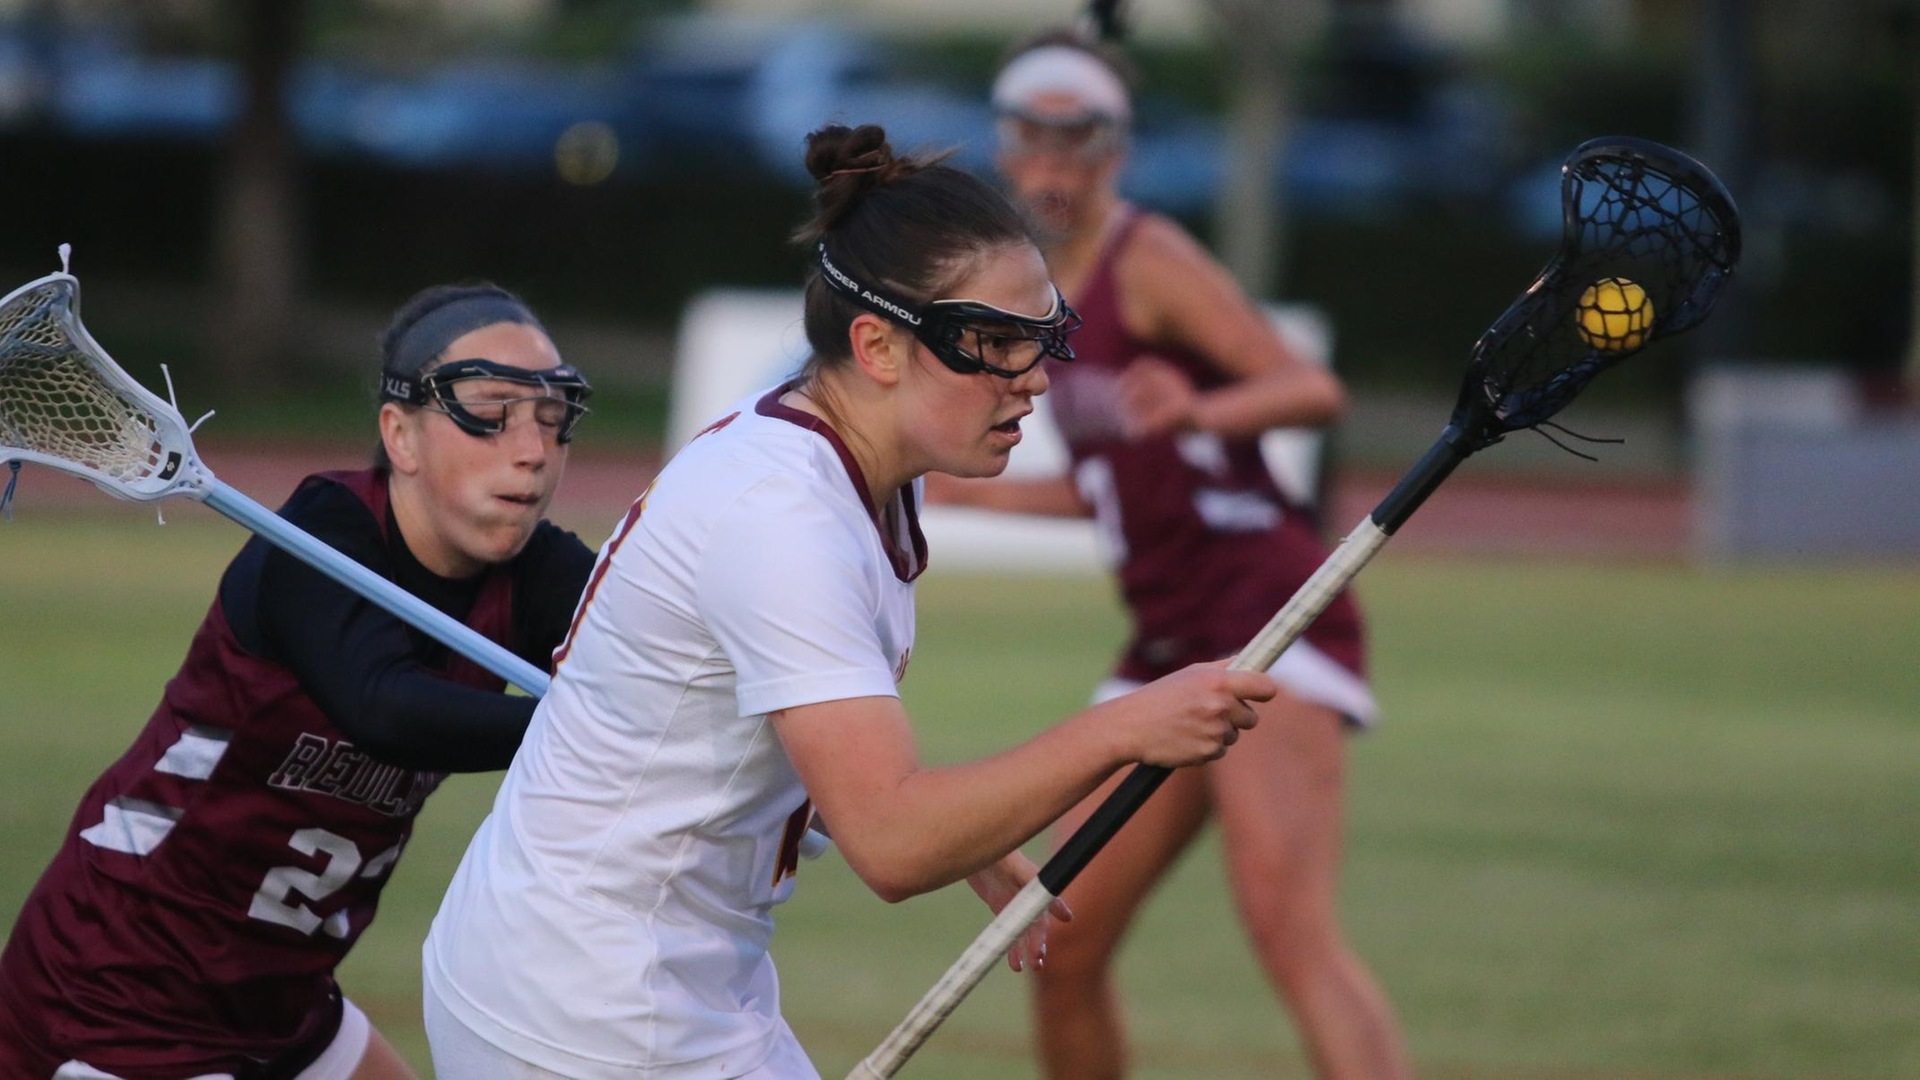 Emme McMullen had 4 goals to lead CMS in scoring (photo by Sun Young Byun)